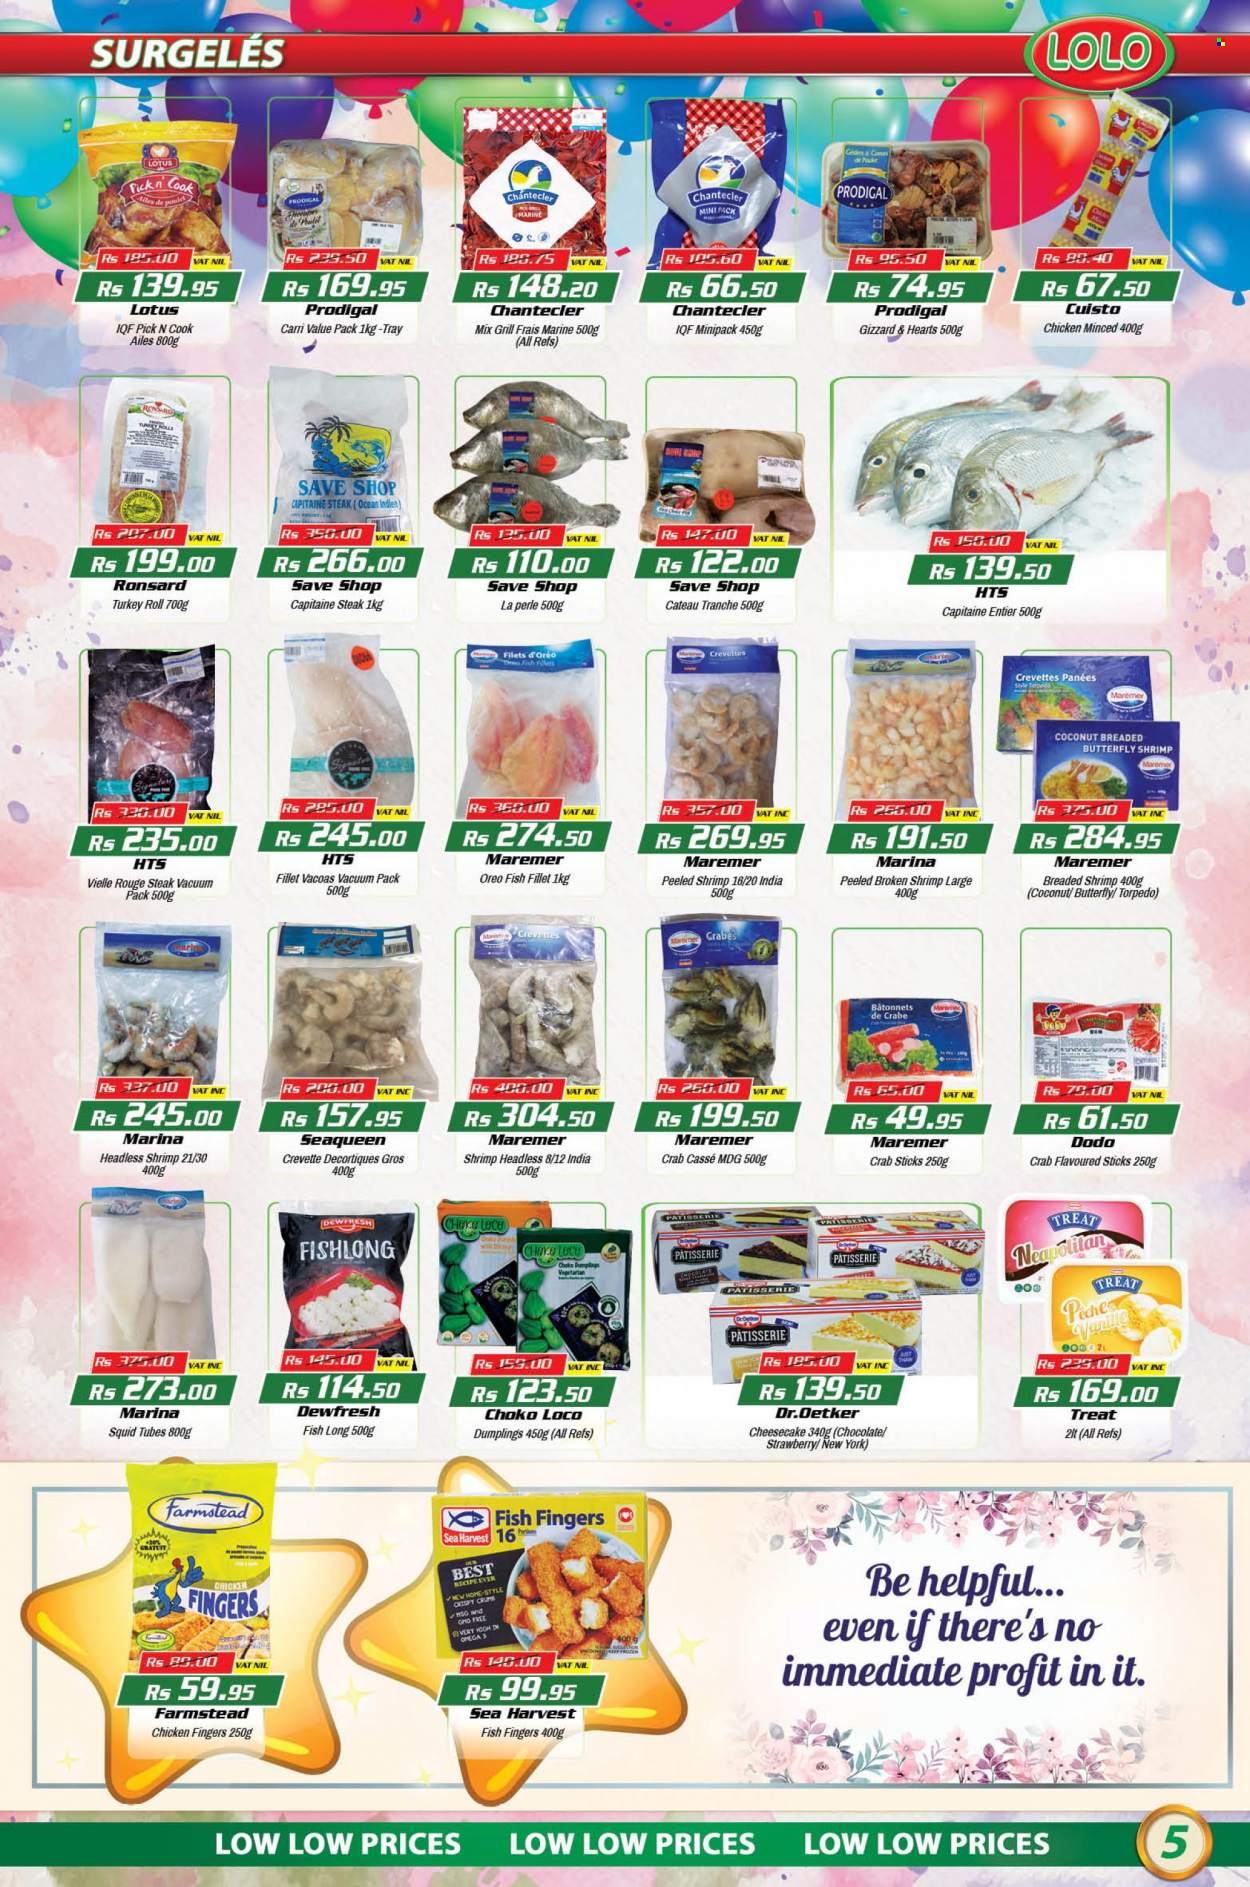 thumbnail - LOLO Hyper Catalogue - 26.07.2022 - 16.08.2022 - Sales products - cheesecake, chayote, fish fillets, squid, crab, fish, fish fingers, Sea Harvest, fish sticks, dumplings, Dr. Oetker, chocolate, tea, Rex, Lotus, tray, Oreo, steak. Page 5.